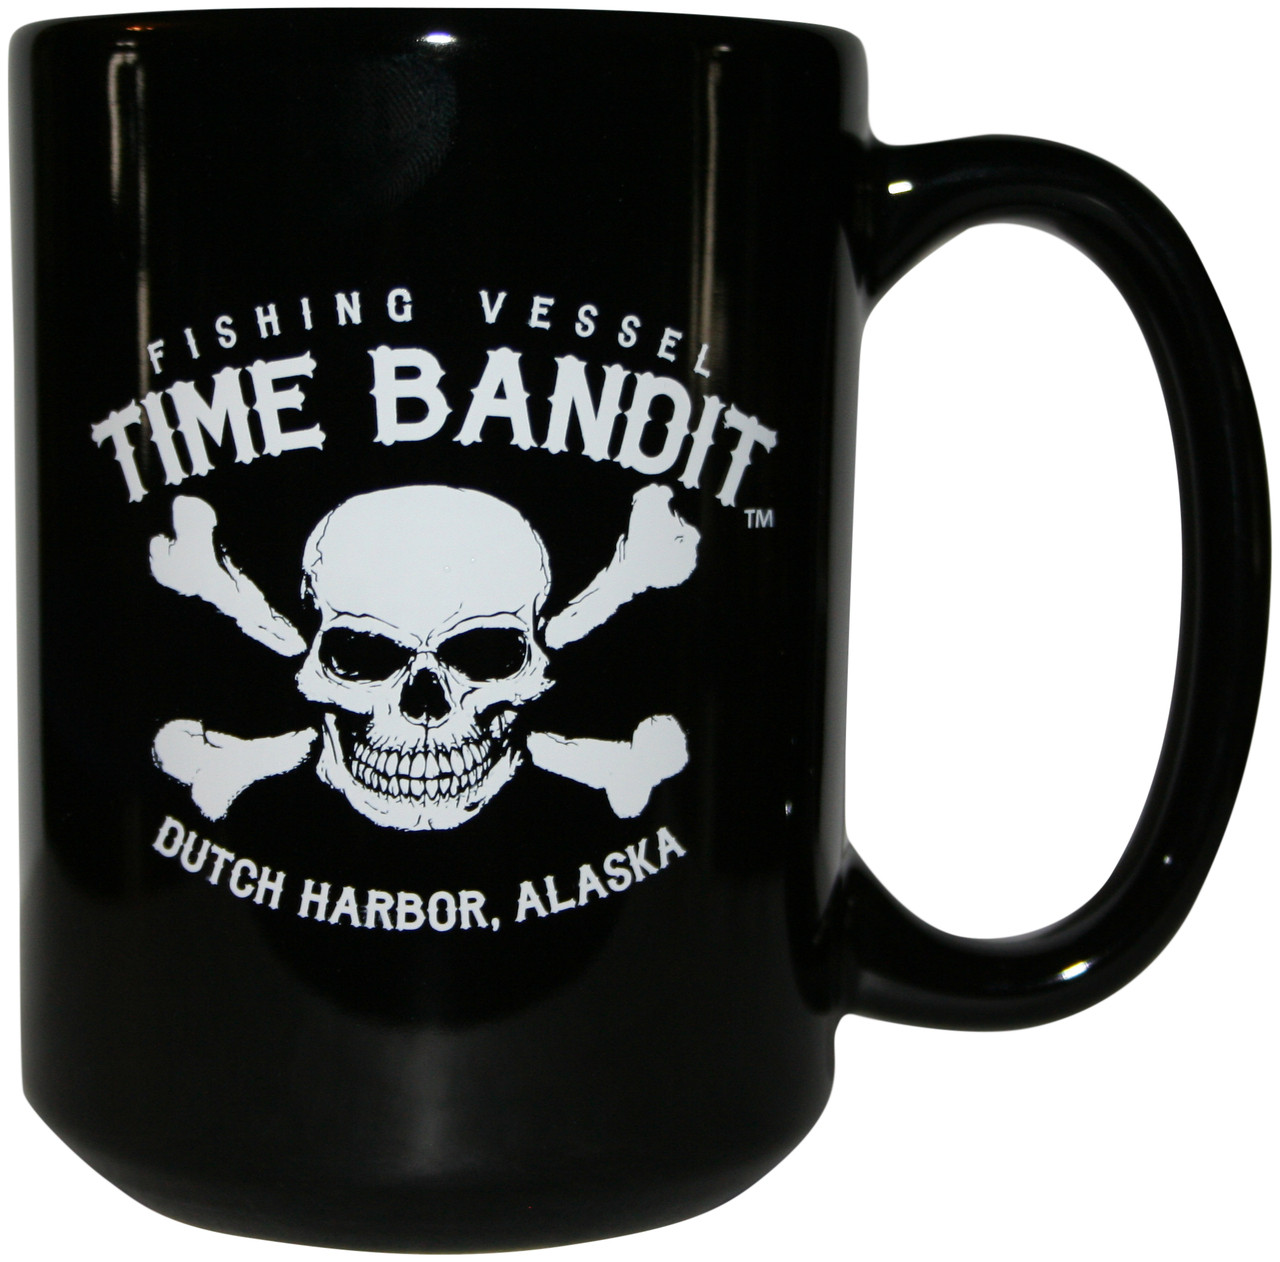 who will captain the time bandit next year